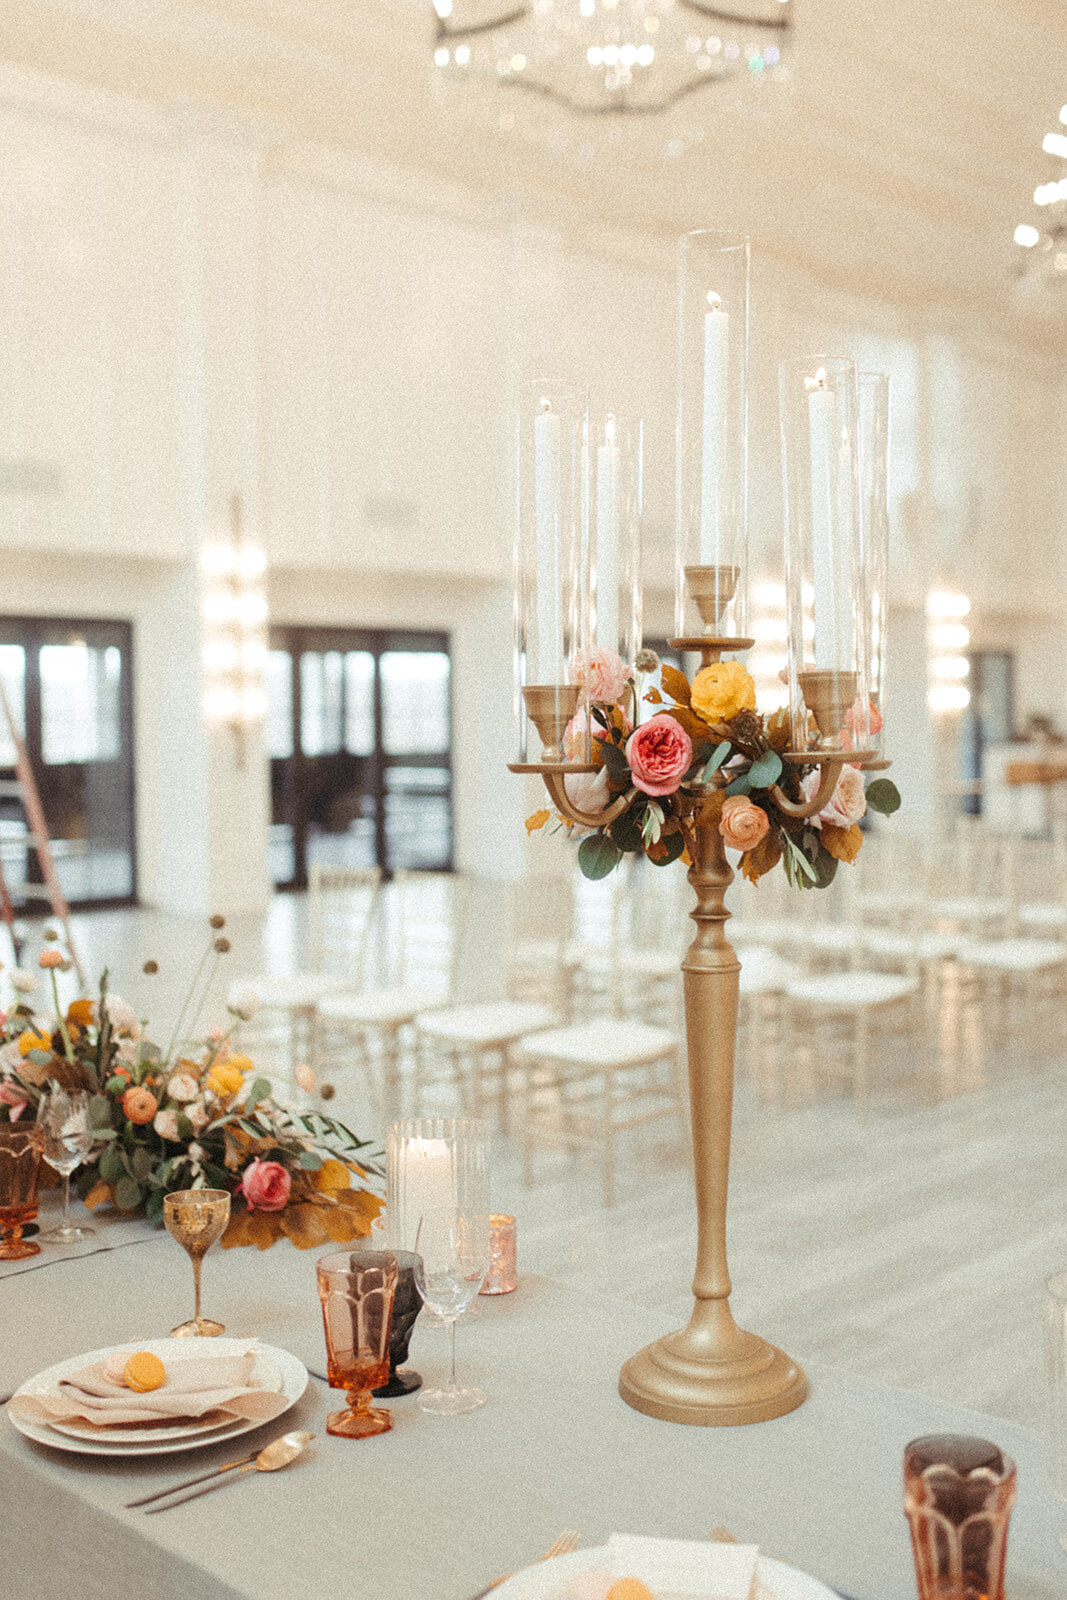 A table set with gold gray linen, candlesticks, flowers, set against a room filled with white and gold chairs.